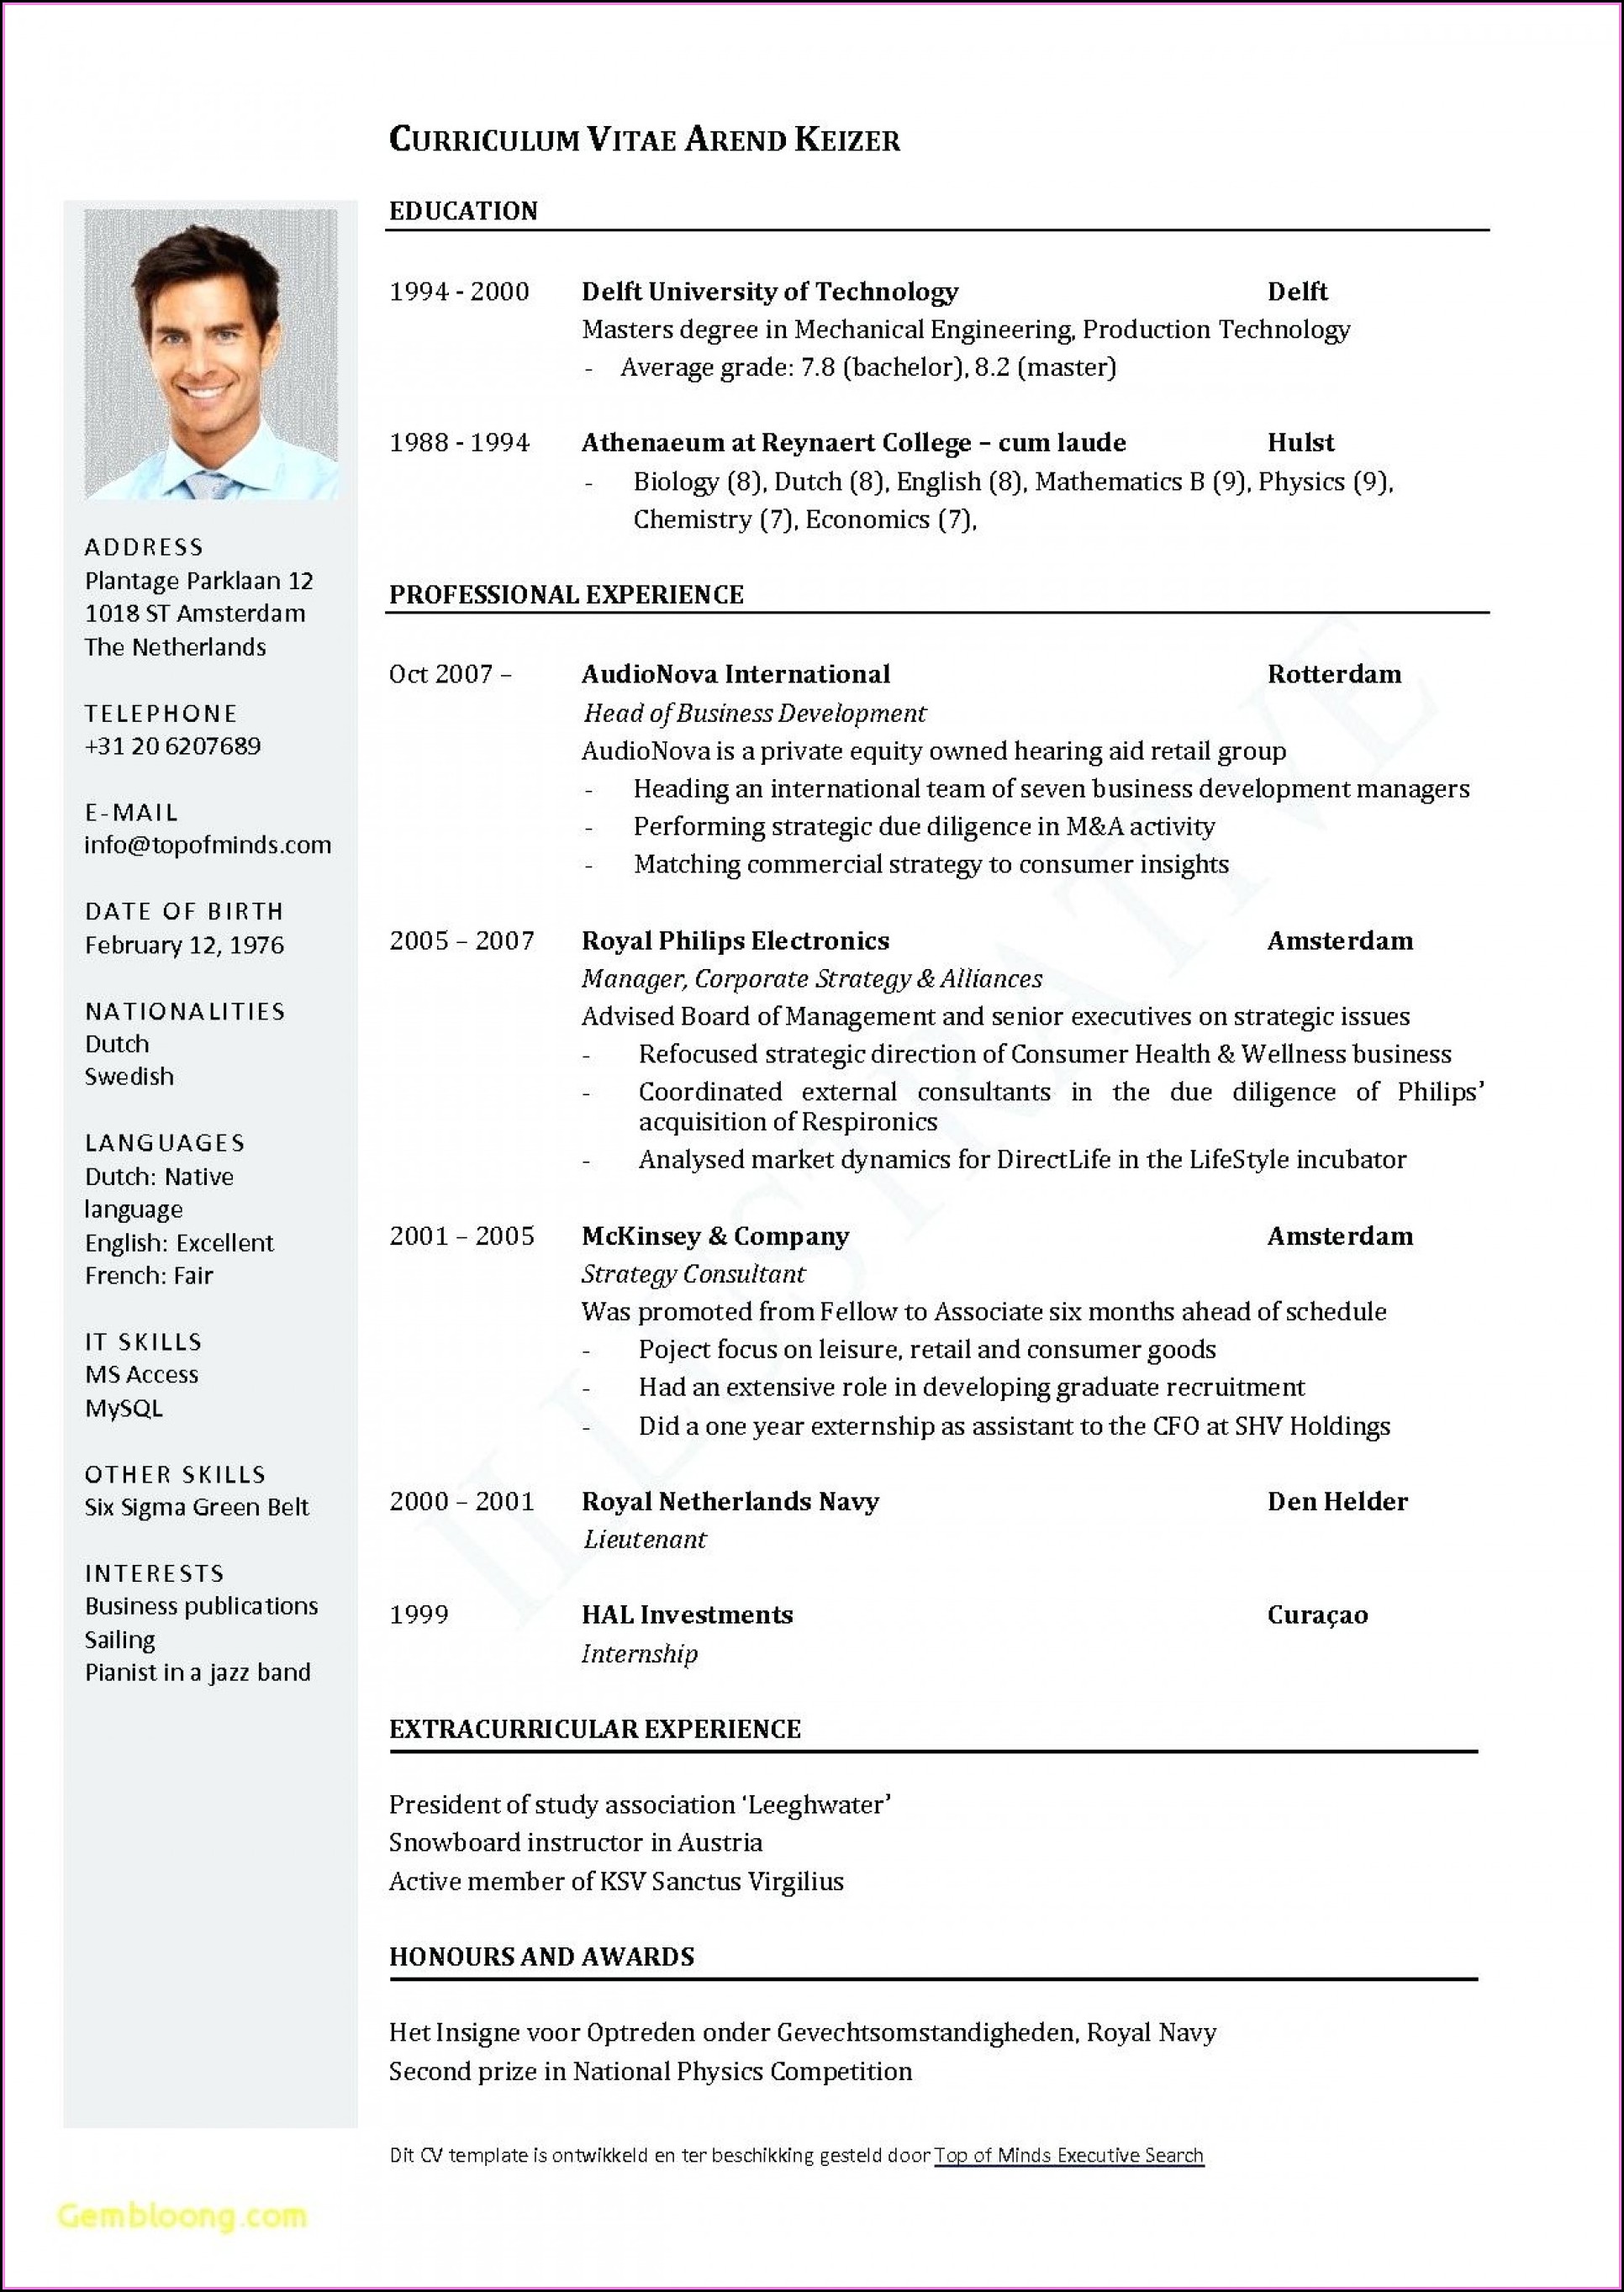 free-executive-cv-template-download-resume-resume-examples-76ygbd39ol